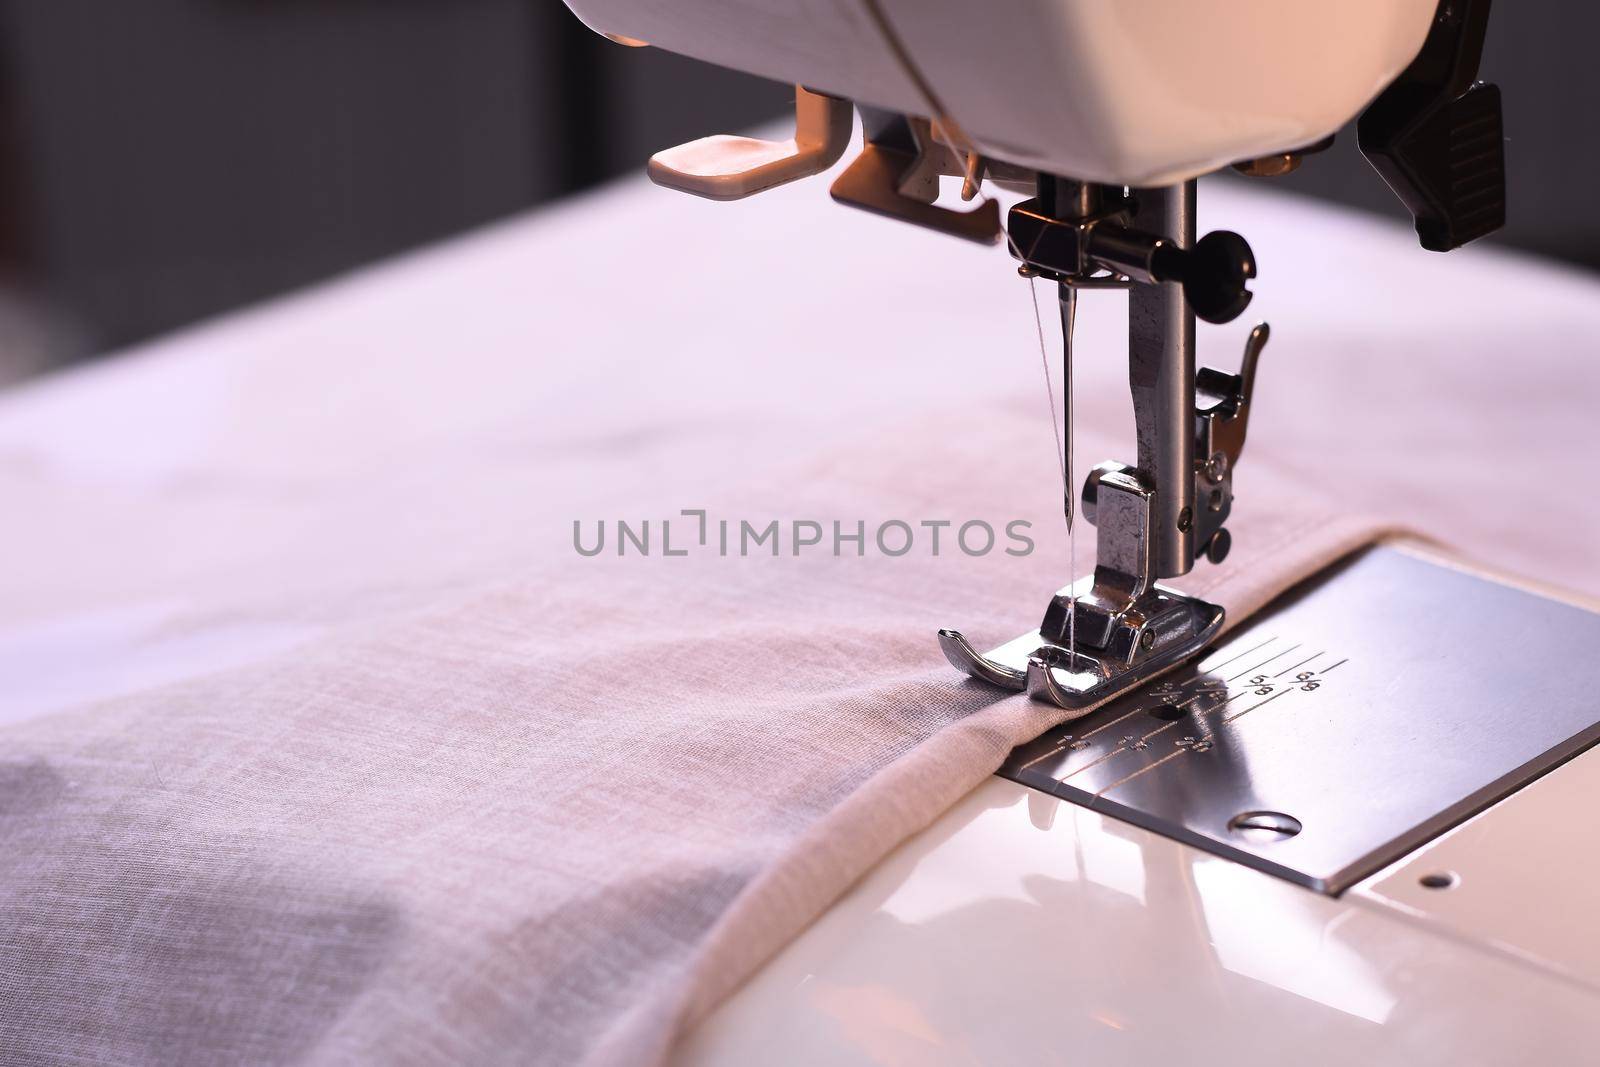 The process of sewing on a sewing machine. No people. No hands. Close-up.